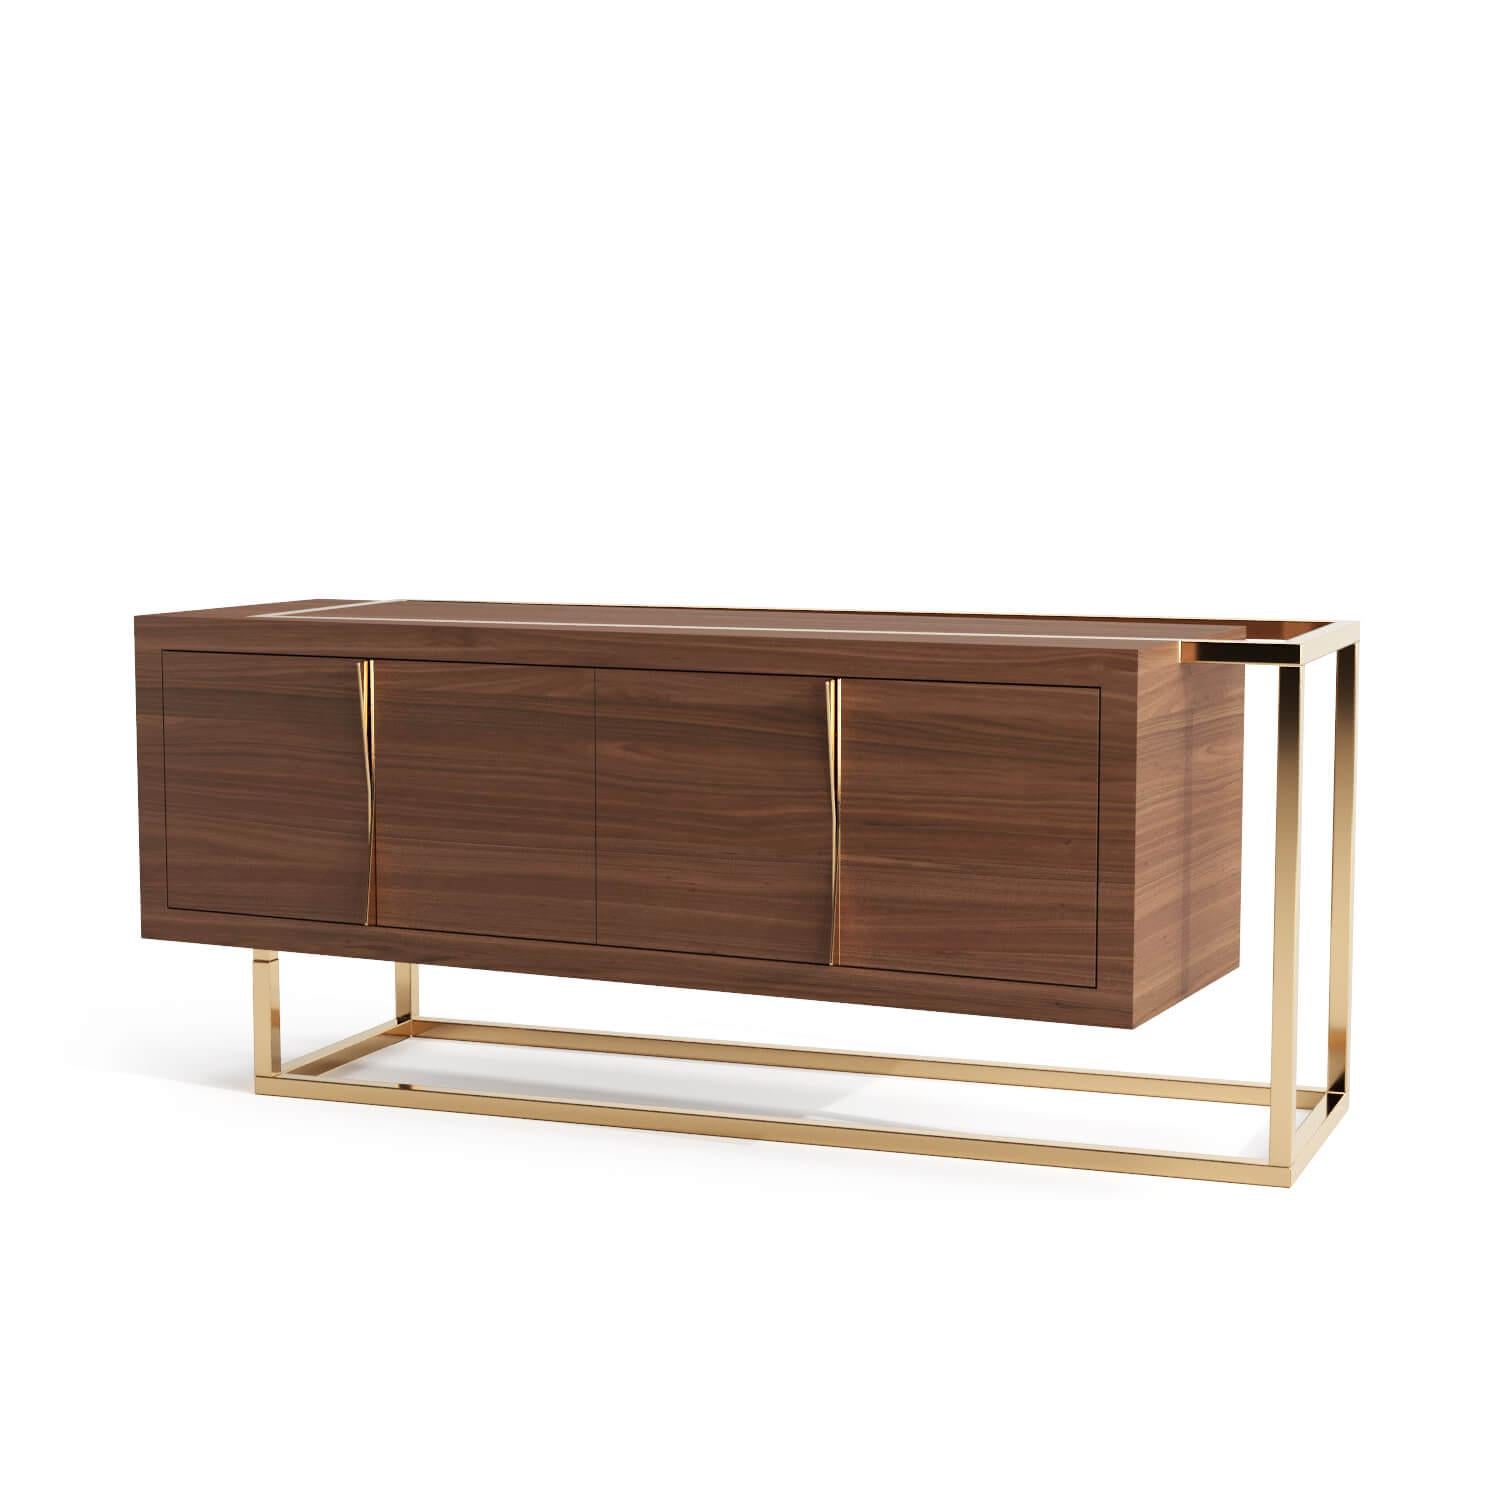 Portuguese Modern Minimalist Credenza Sideboard in Walnut Wood and Brushed Brass For Sale